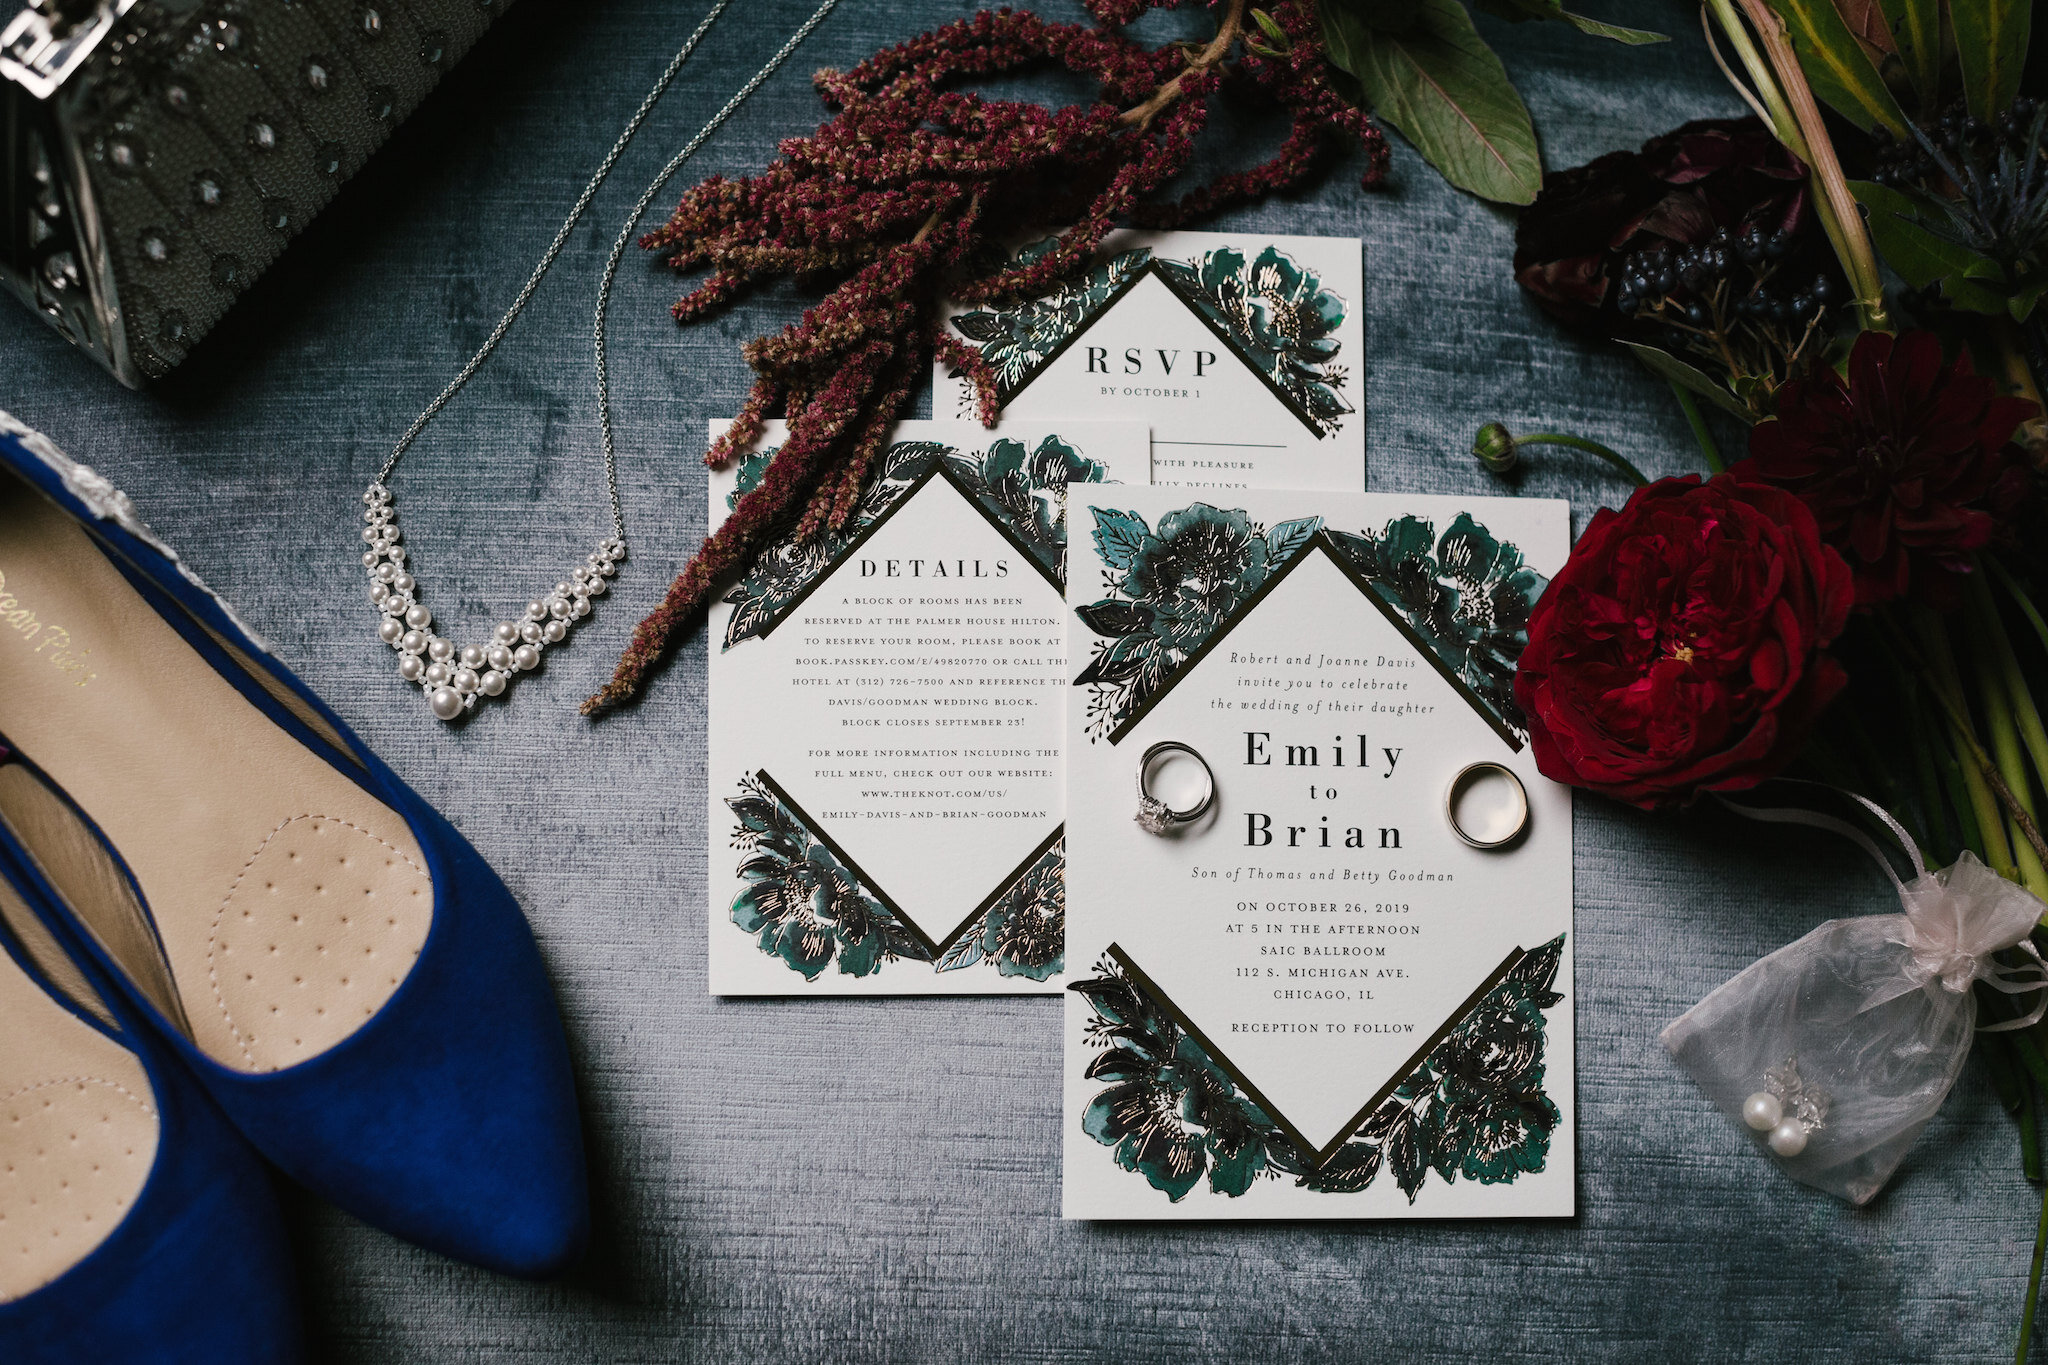 Wedding Stationery Suite: Elegant Jewel-Toned Wedding captured by Dorey Kronick featured on CHI thee WED